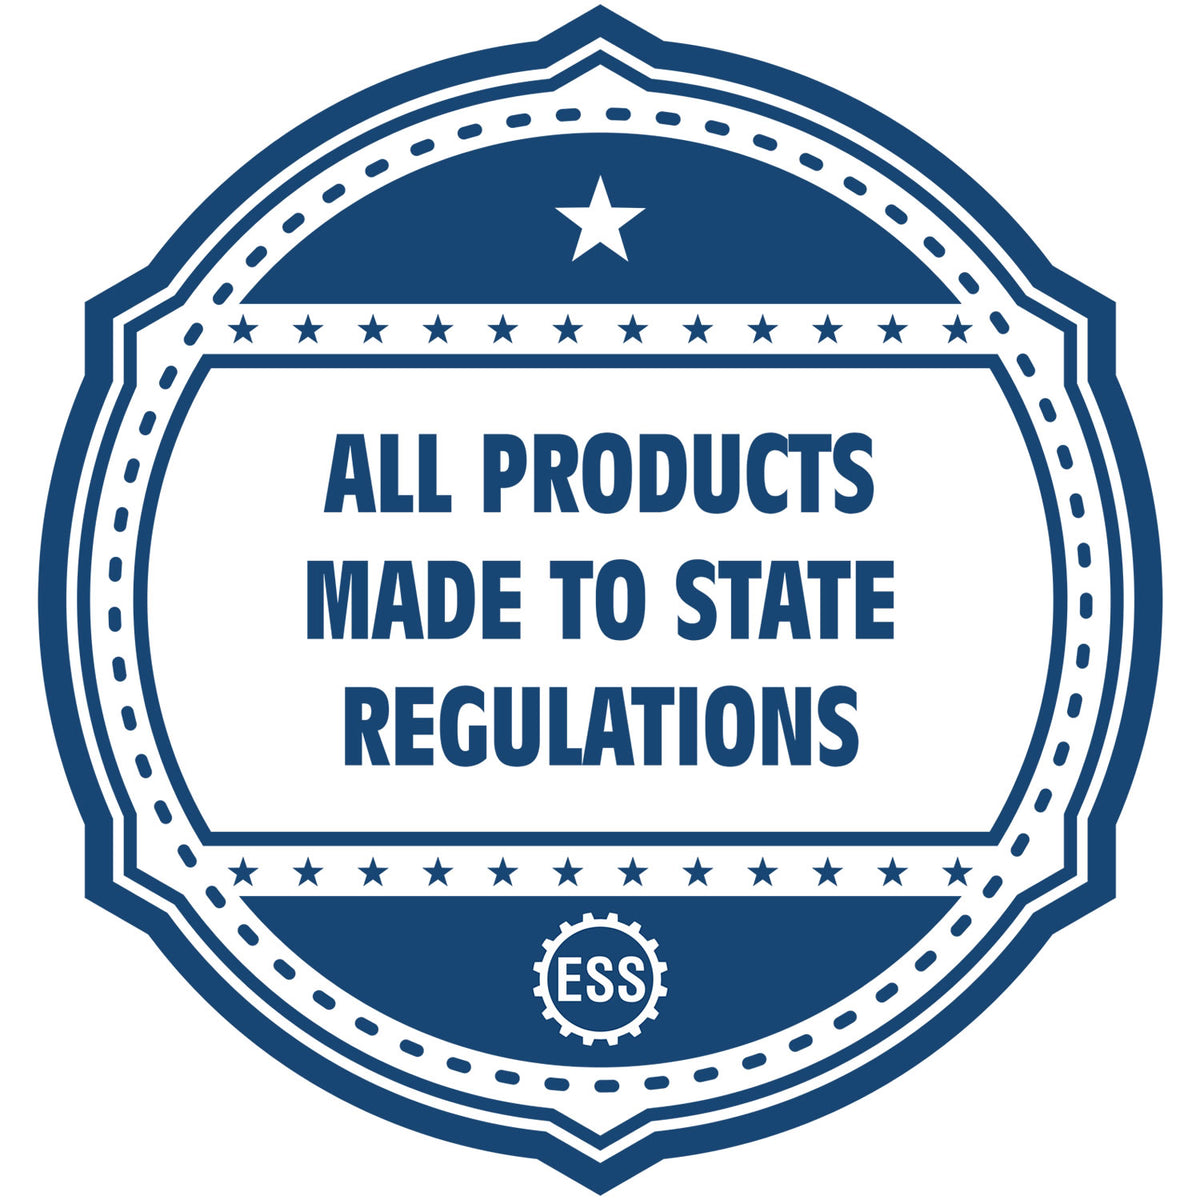 A blue icon or badge for the Arkansas Professional Geologist Seal Stamp showing that this product is made in compliance with state regulations.